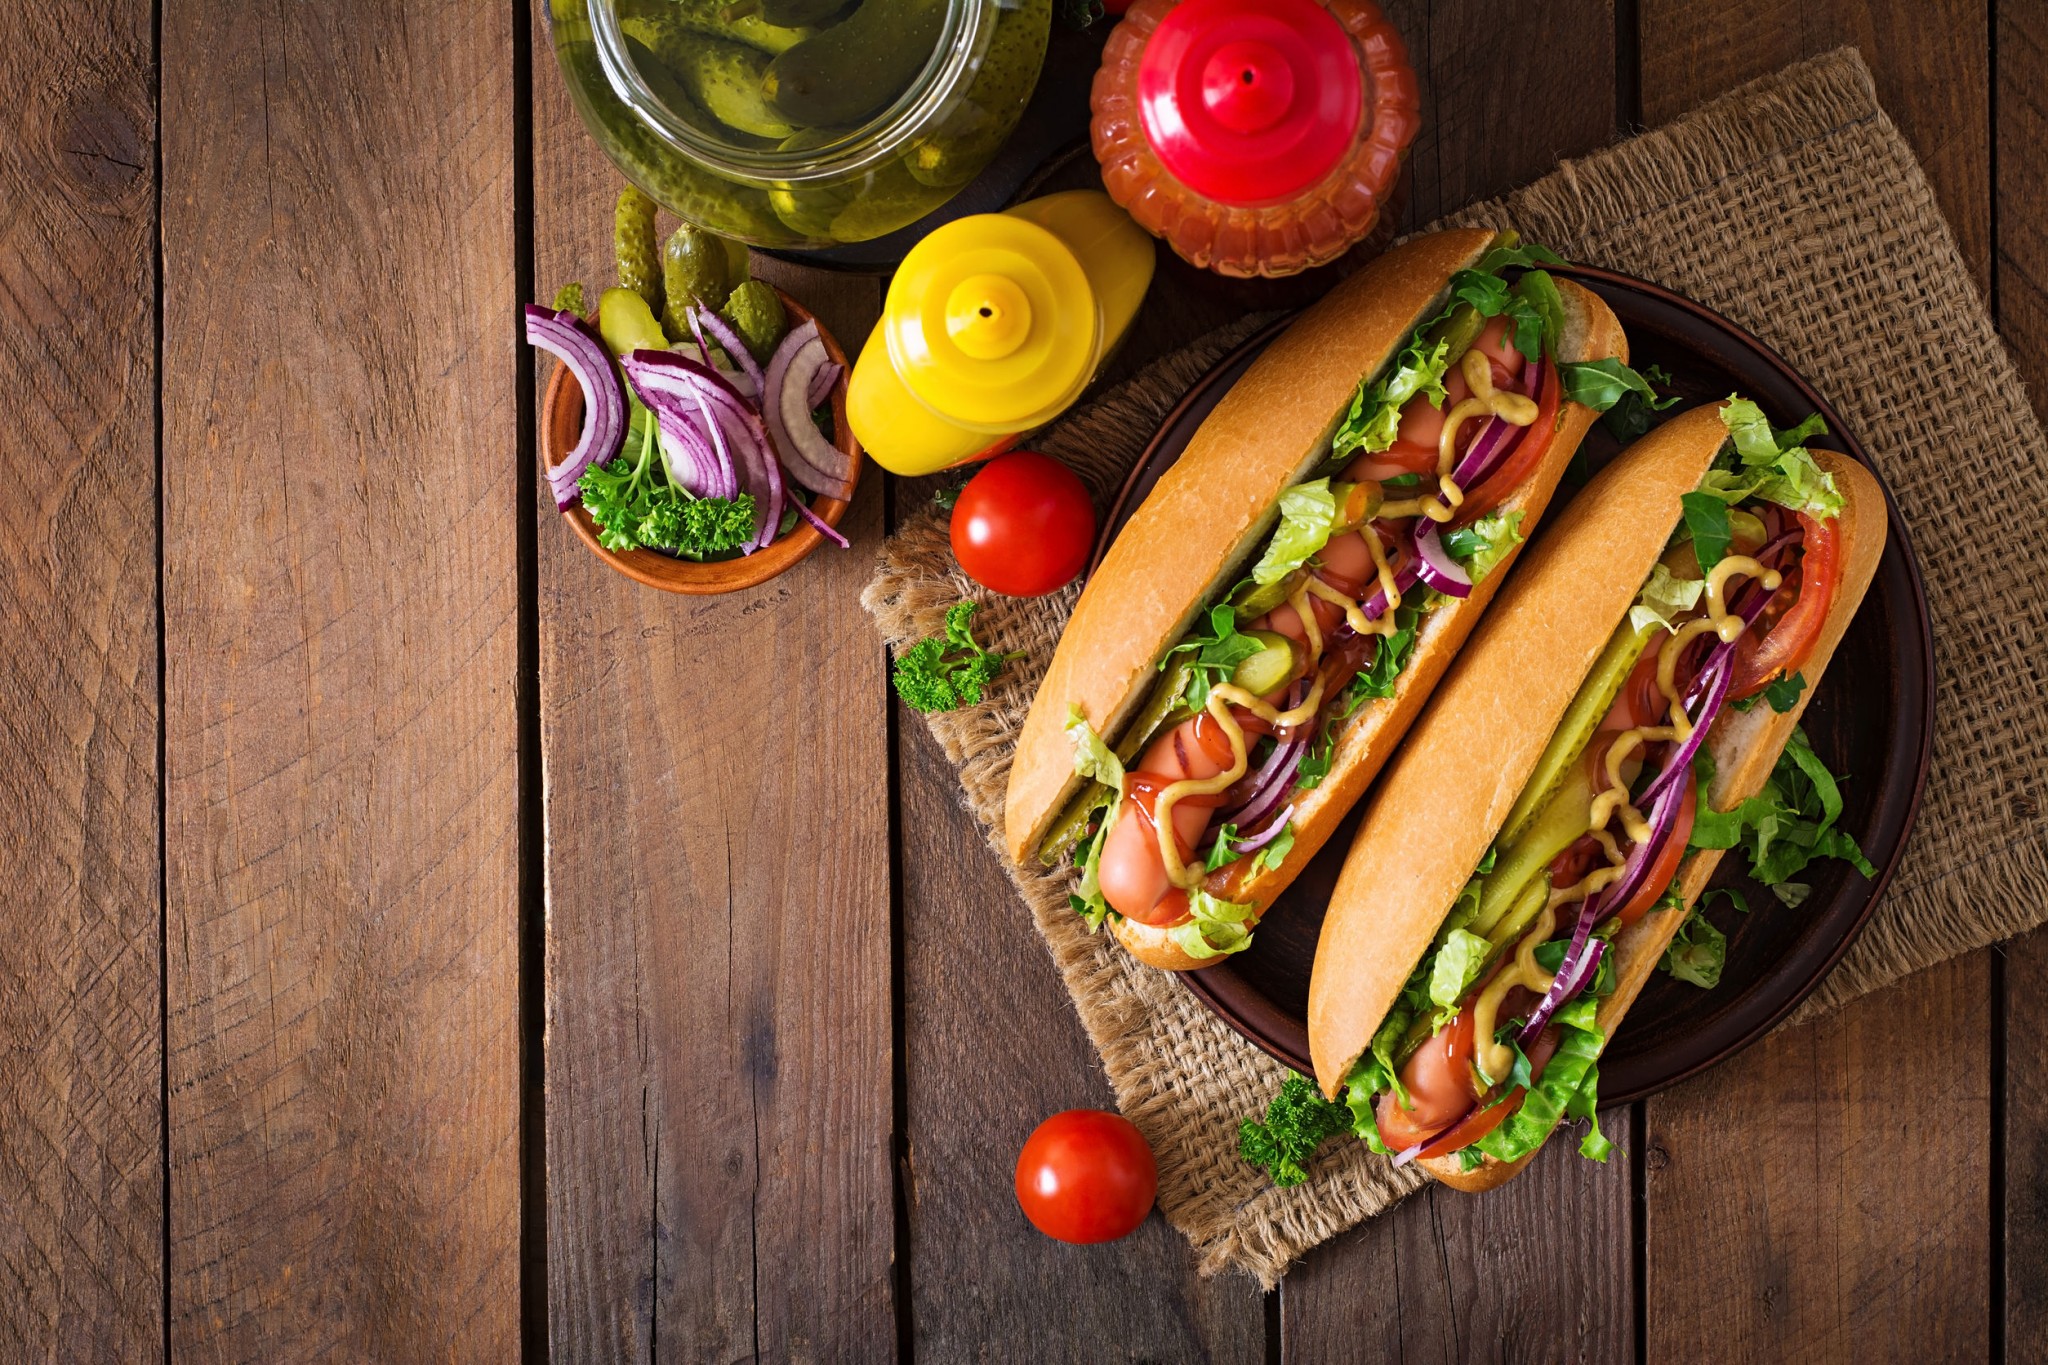 Hot dog with pickles, tomato and lettuce on wooden background. Top view